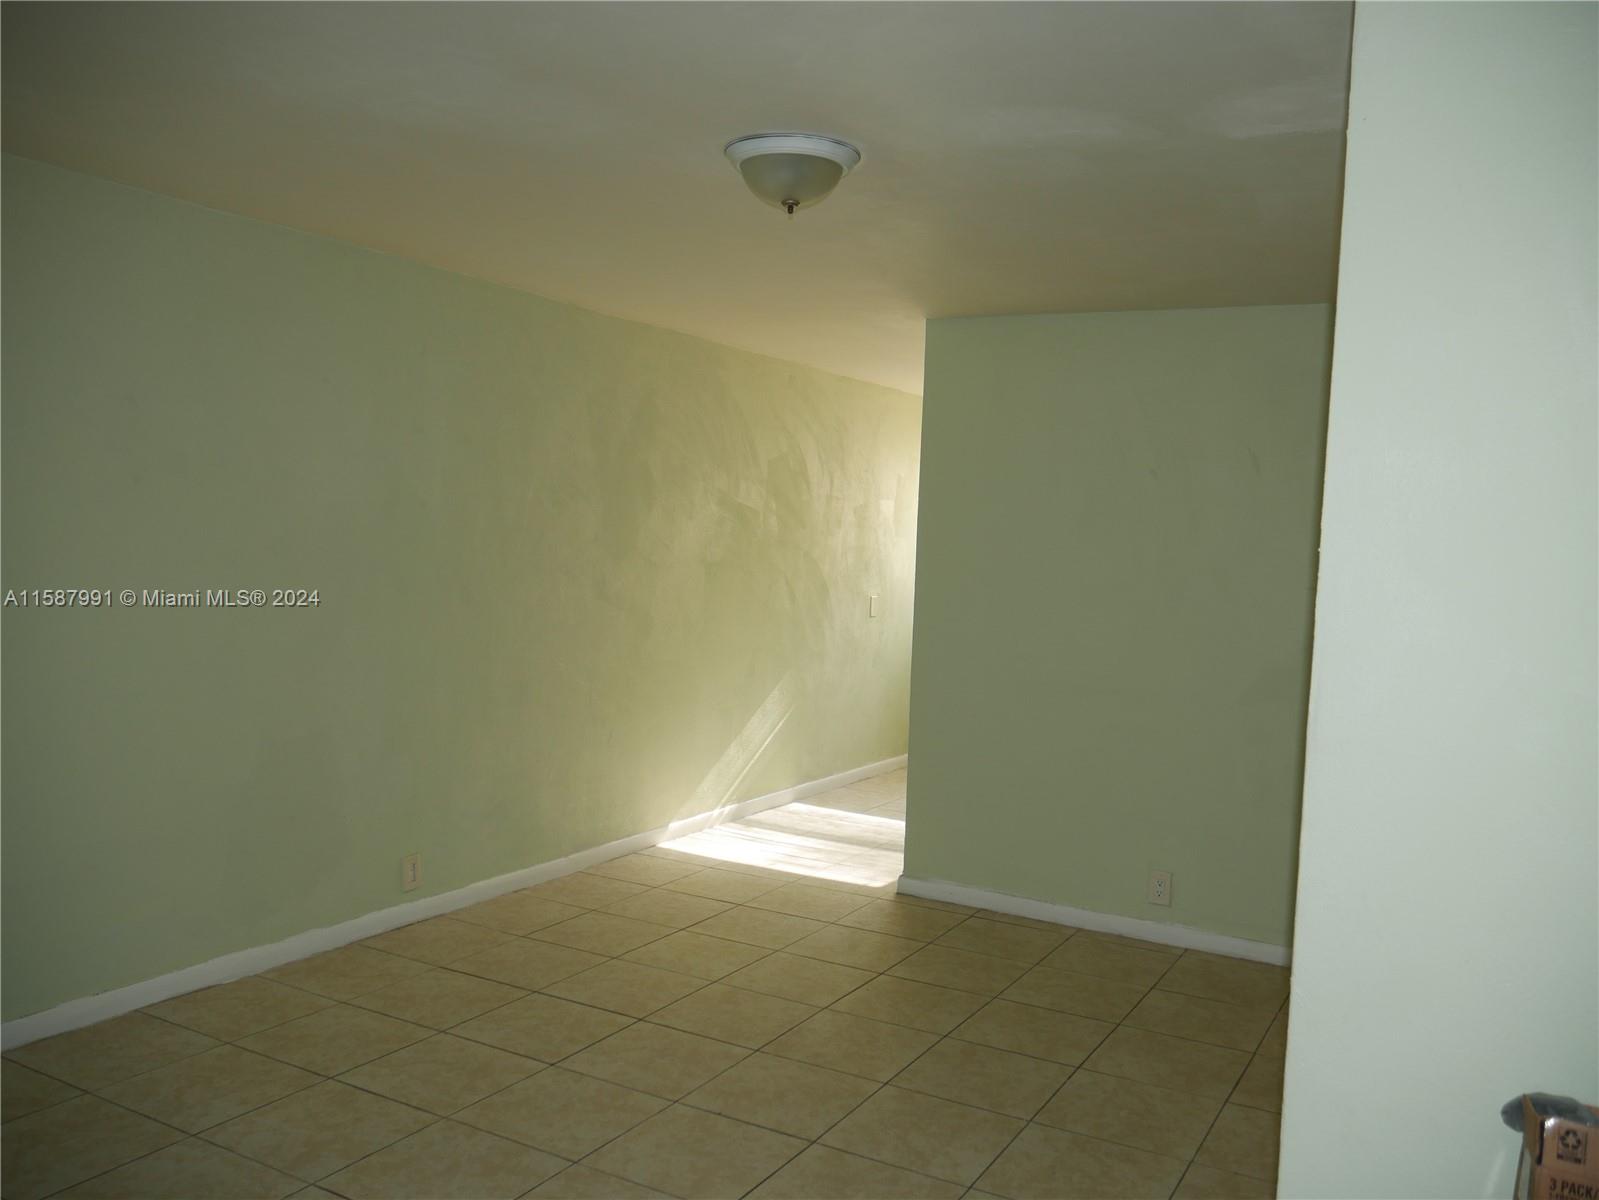 Rental Property at 1131 N Rosemary Ave, West Palm Beach, Palm Beach County, Florida -  - $710,000 MO.